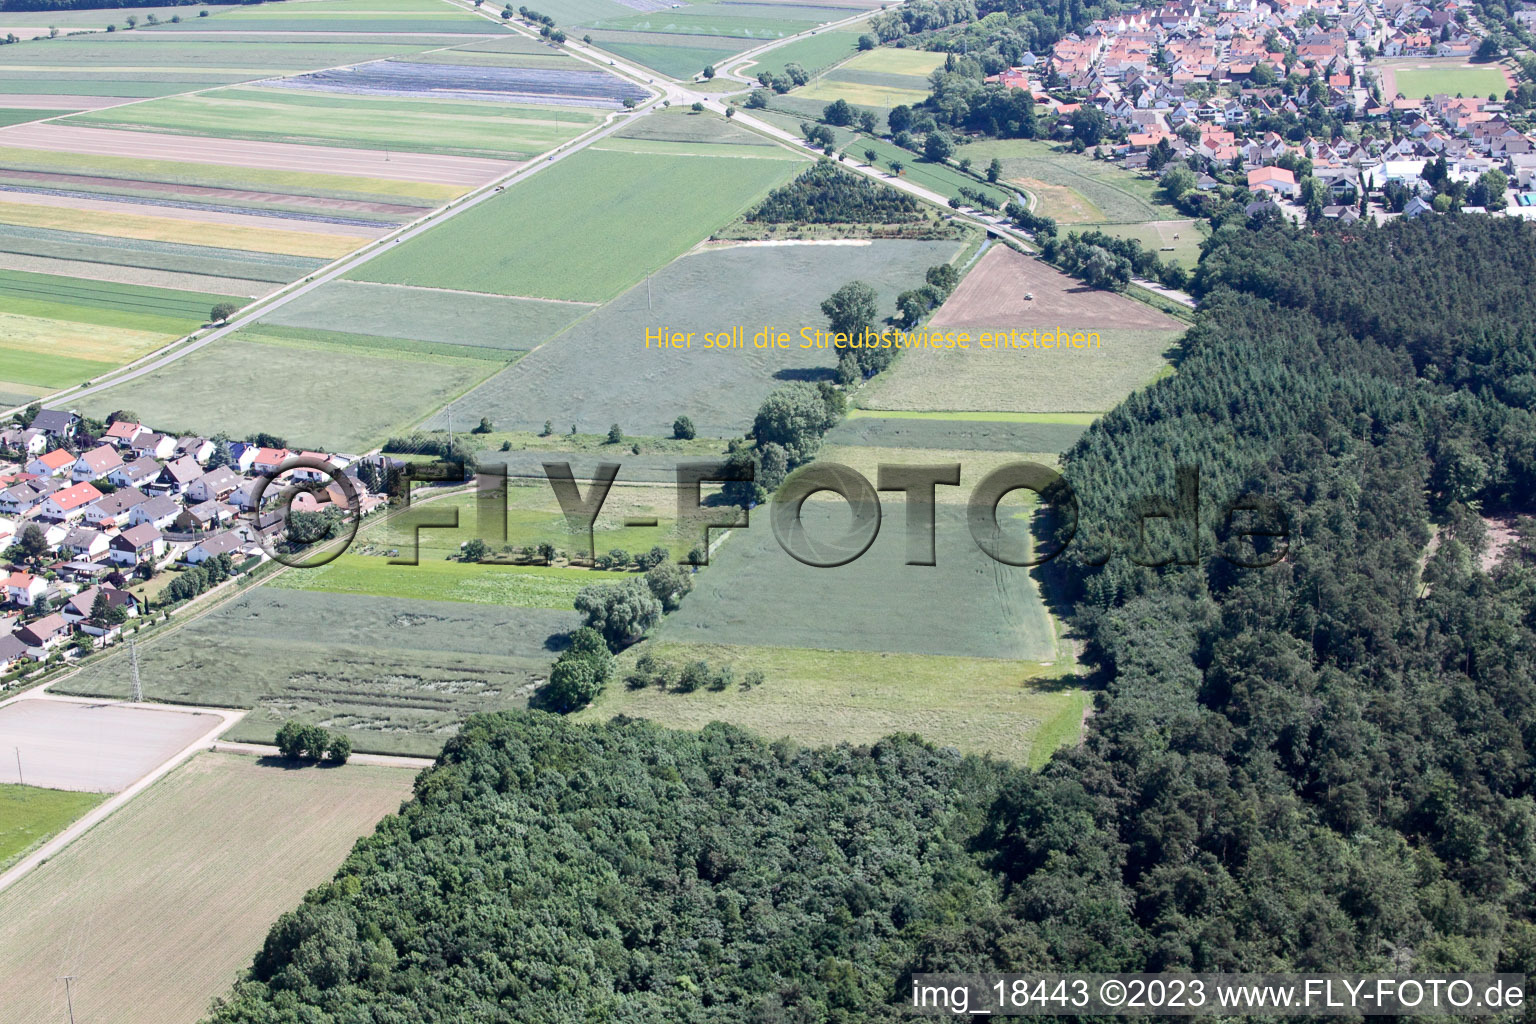 Aerial photograpy of Hatzenbühl in the state Rhineland-Palatinate, Germany